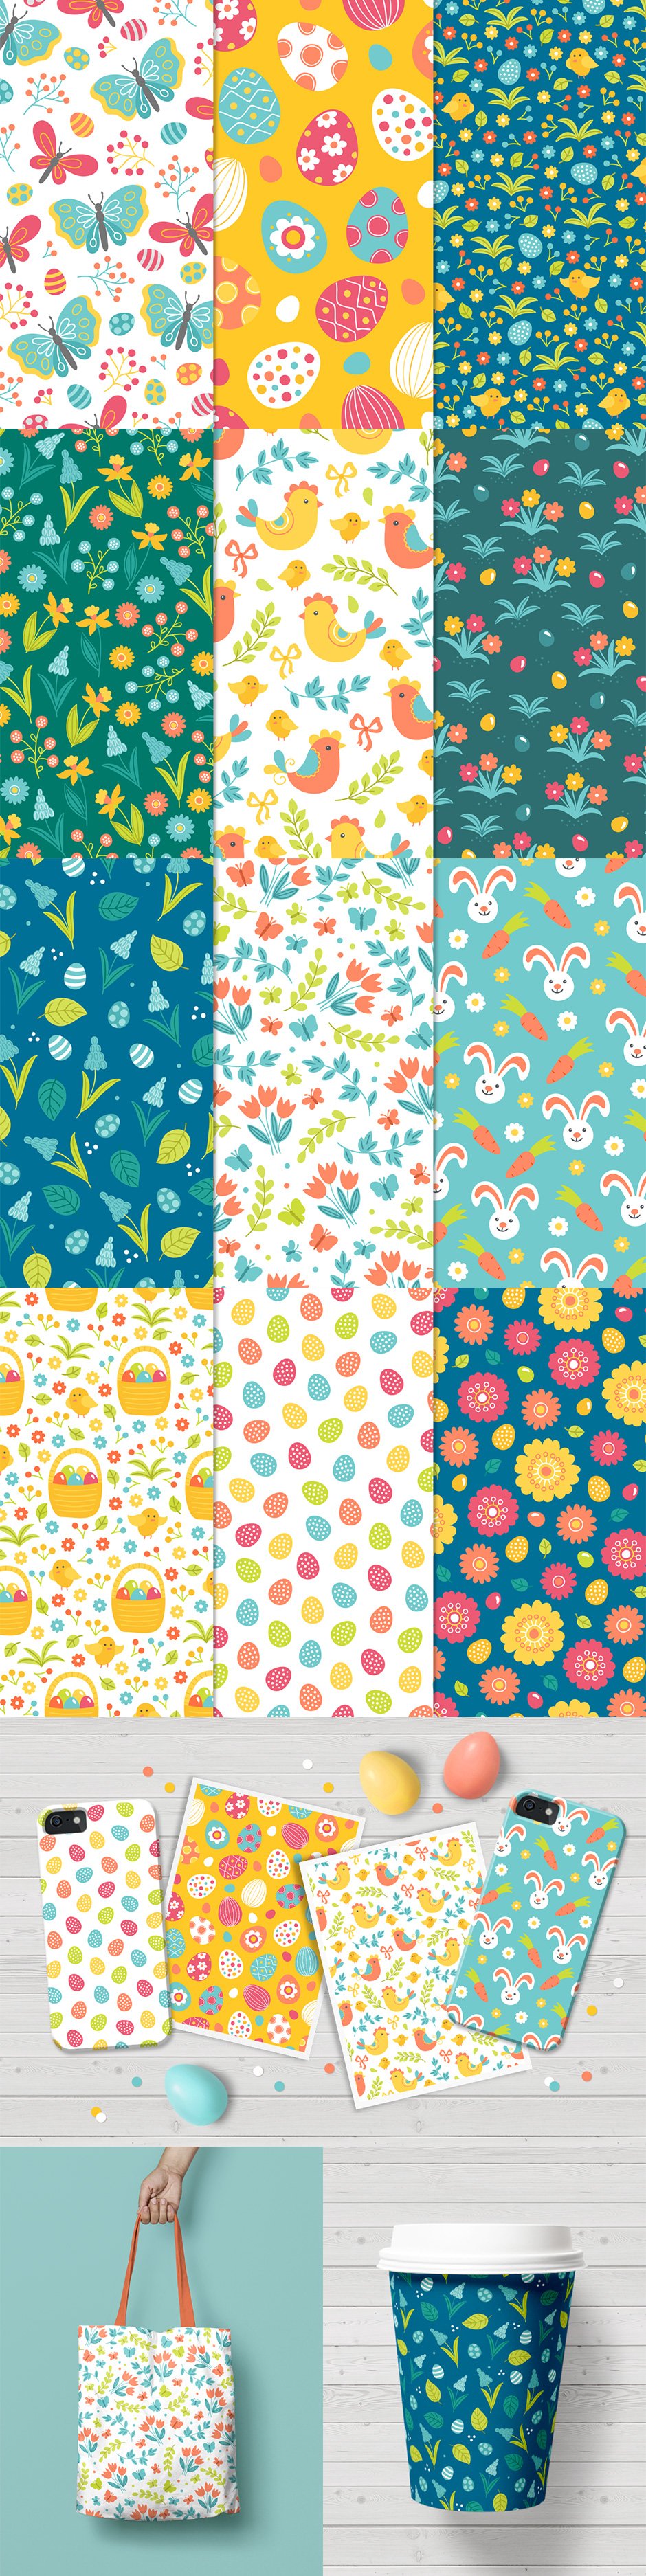 12 Seamless Easter Patterns